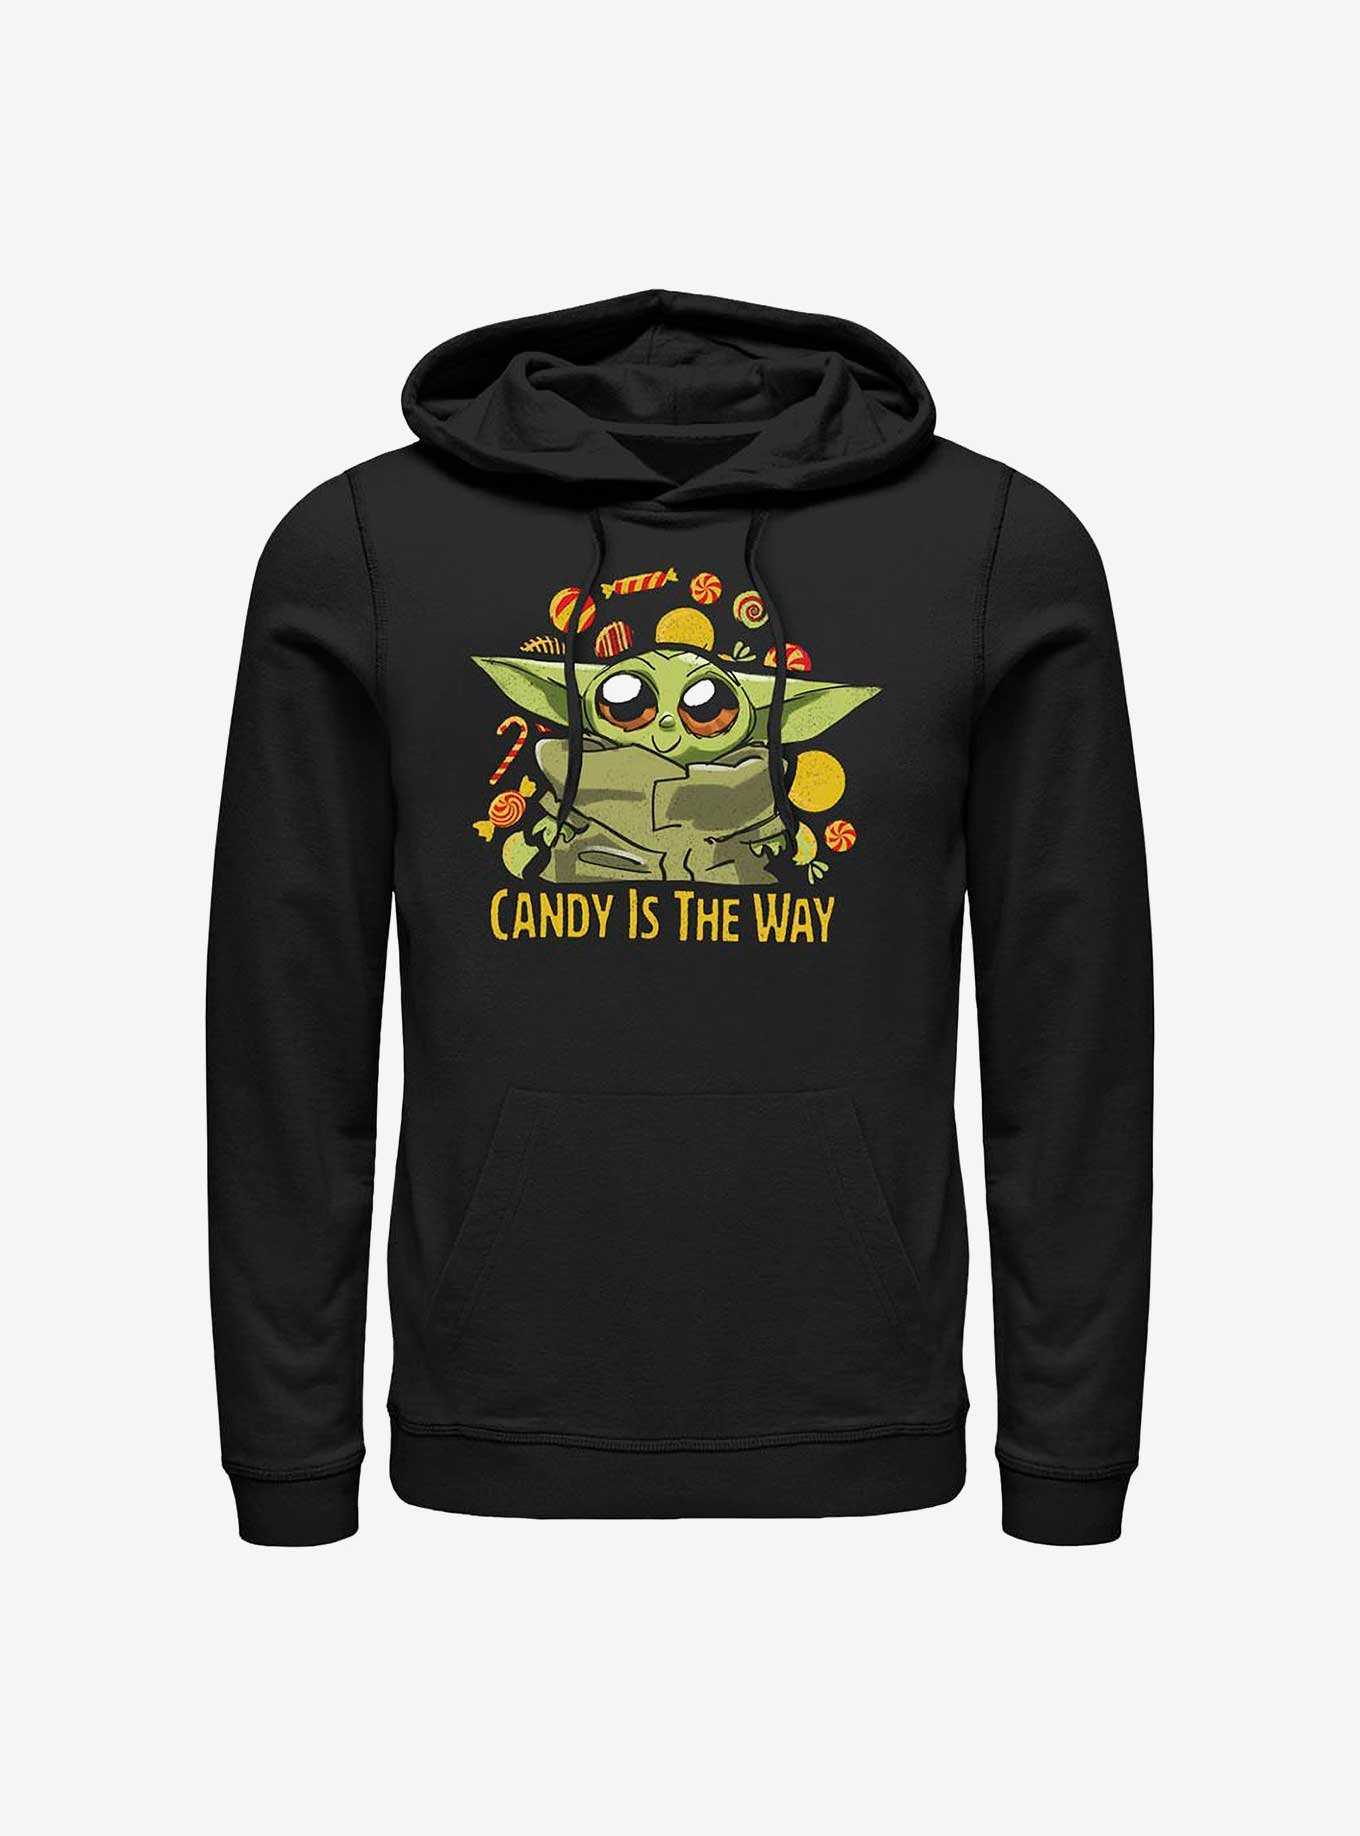 Star Wars The Mandalorian The Child Candy Is The Way Hoodie, , hi-res